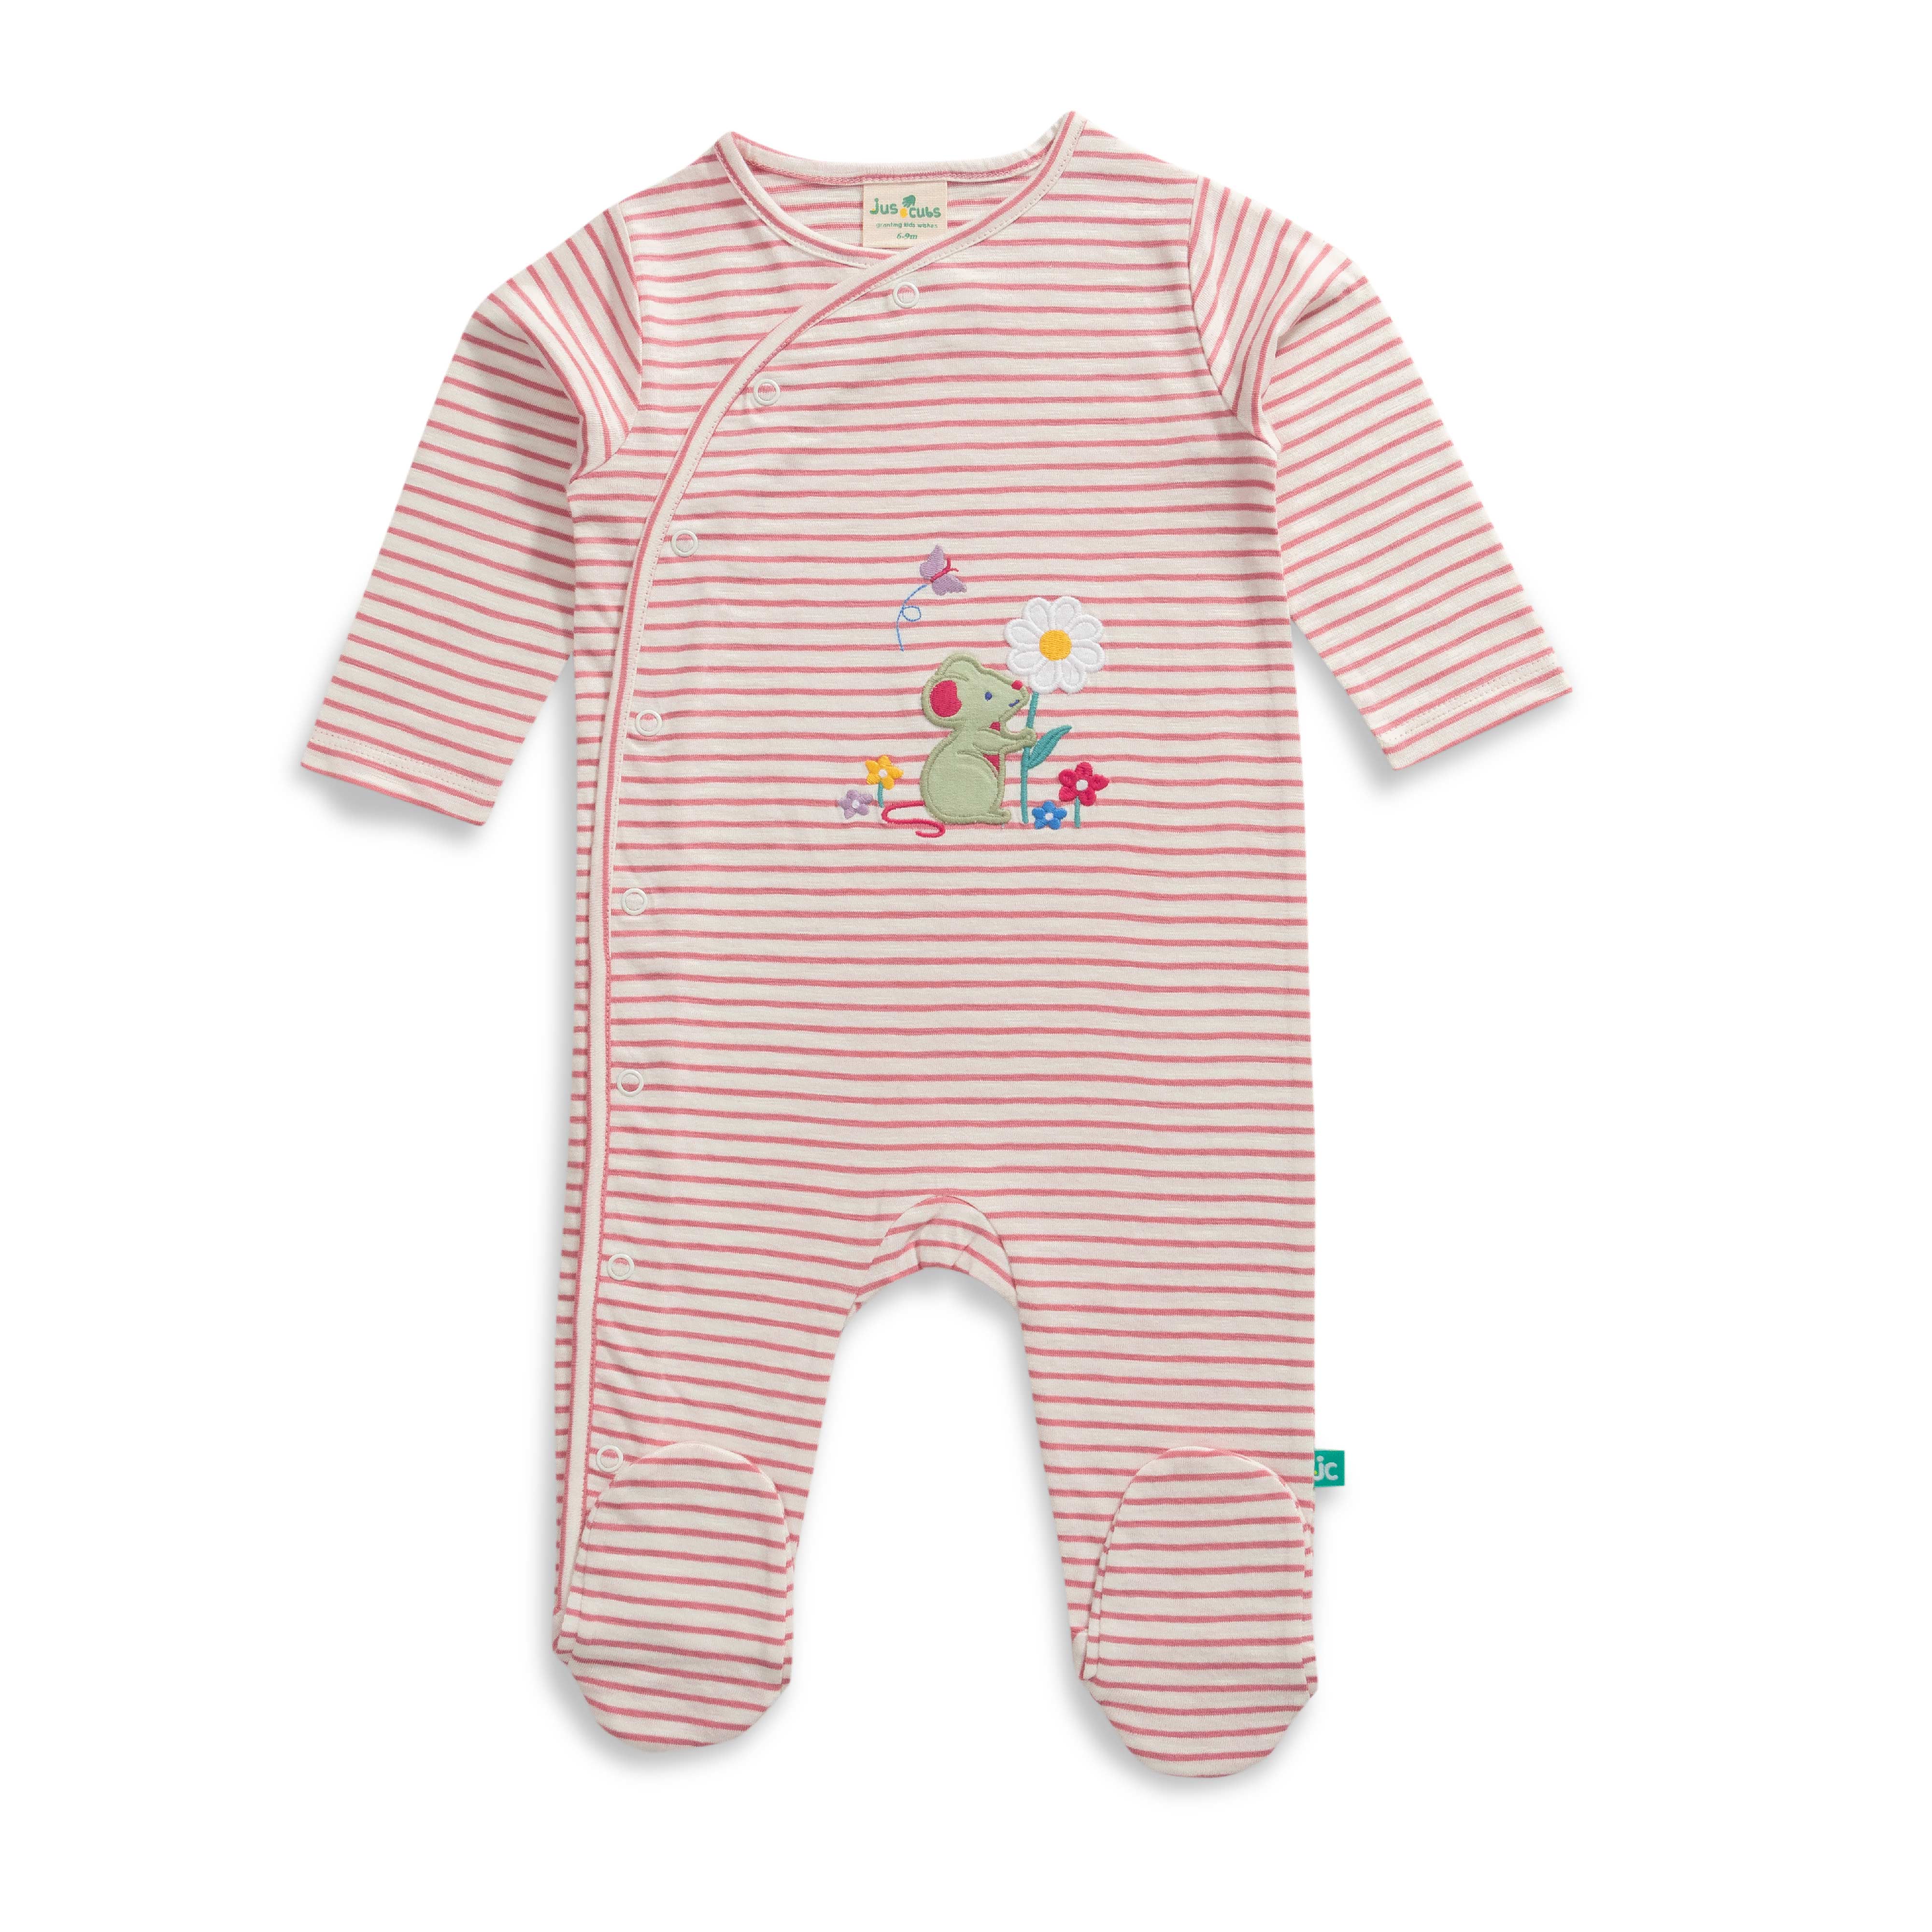 Baby Girls Striped & Embroidery Sleepsuit